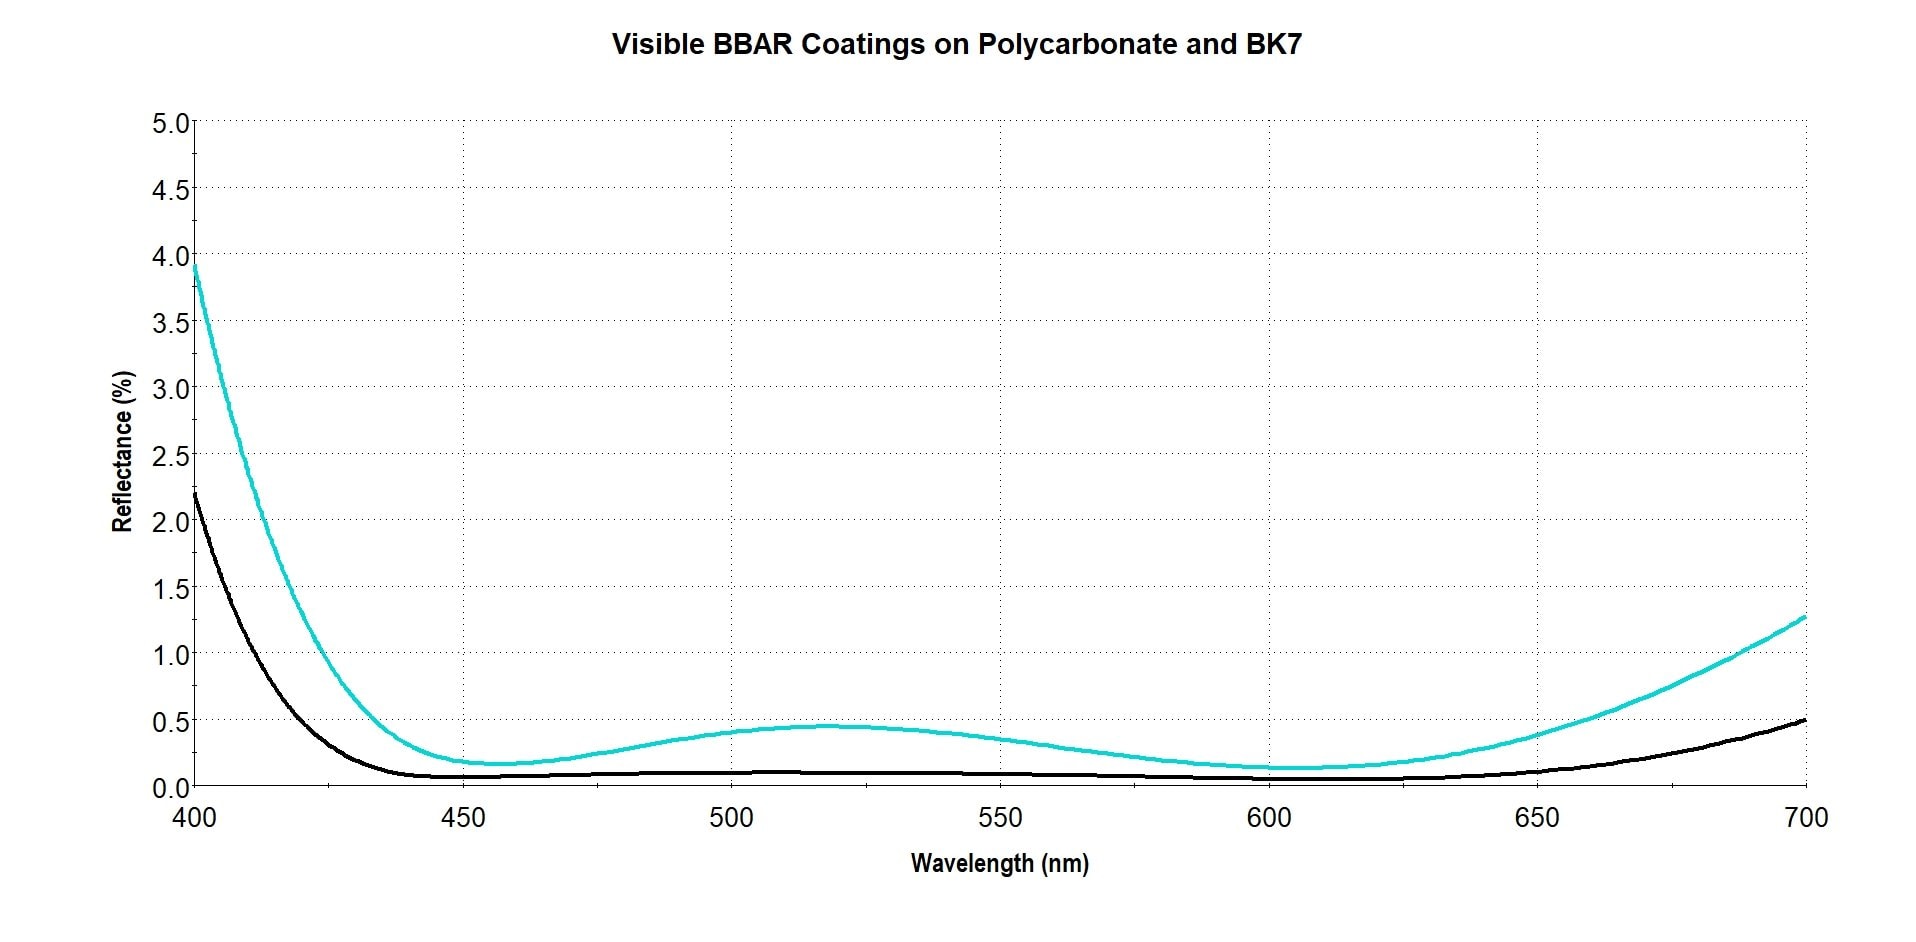 Visible BBAR Coatings on Polycarbonate and BK7